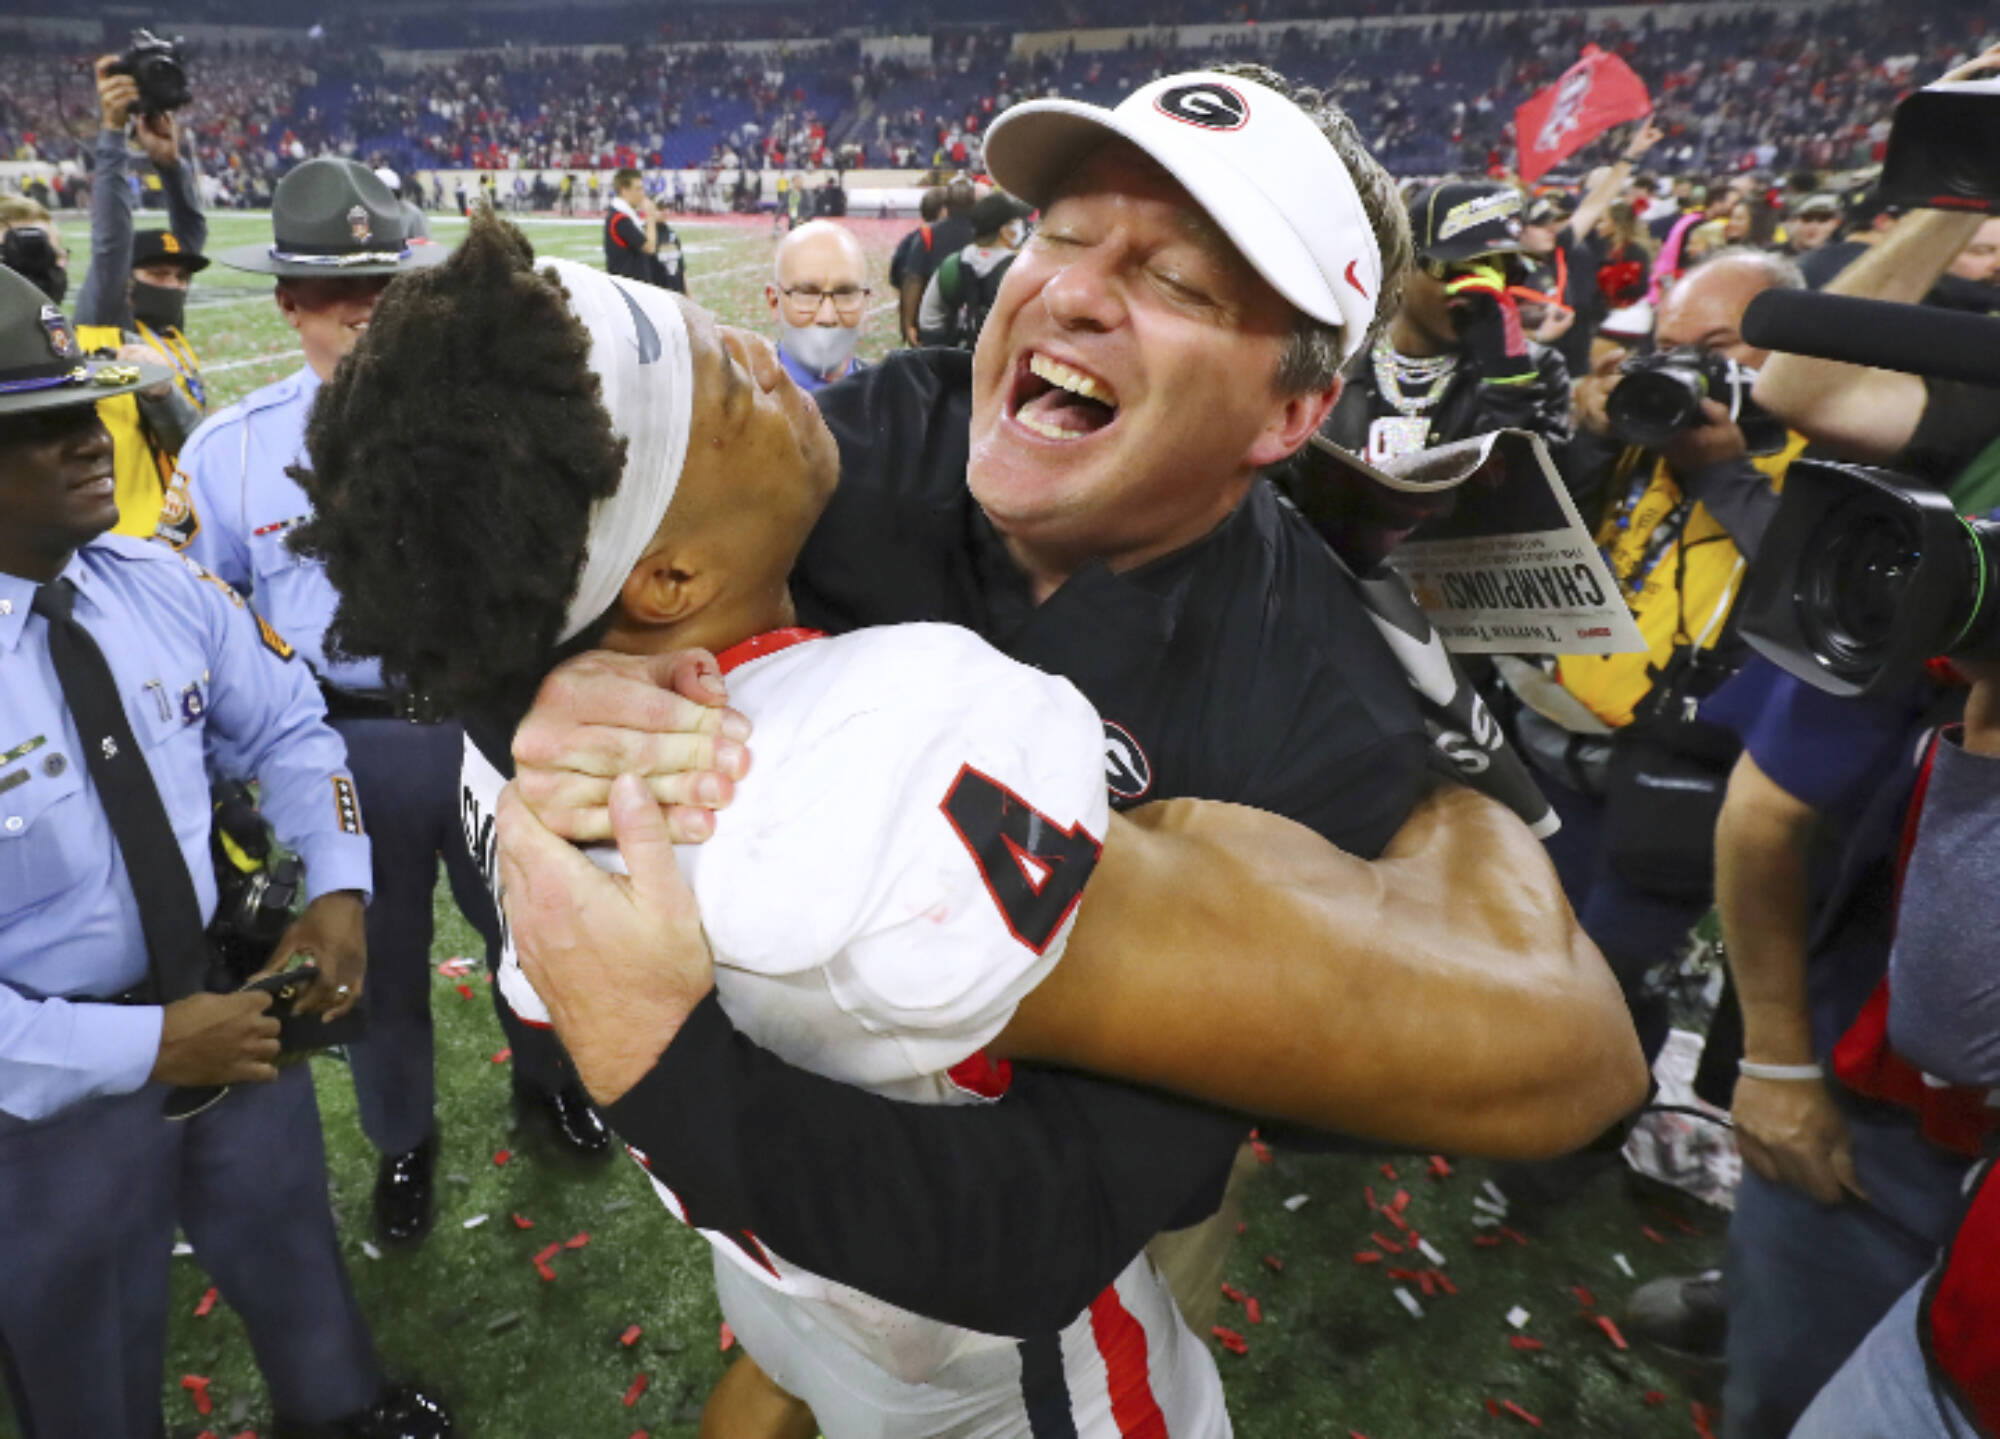 Georgia head coach Kirby Smart celebrates winning the College Football Playoff Championship game against Alabama, getting a hoist from outside linebacker Bolan Smith, early Tuesday, Jan. 11, 2022, in Indianapolis. (Curtis Compton/Atlanta Journal-Constitution via AP)